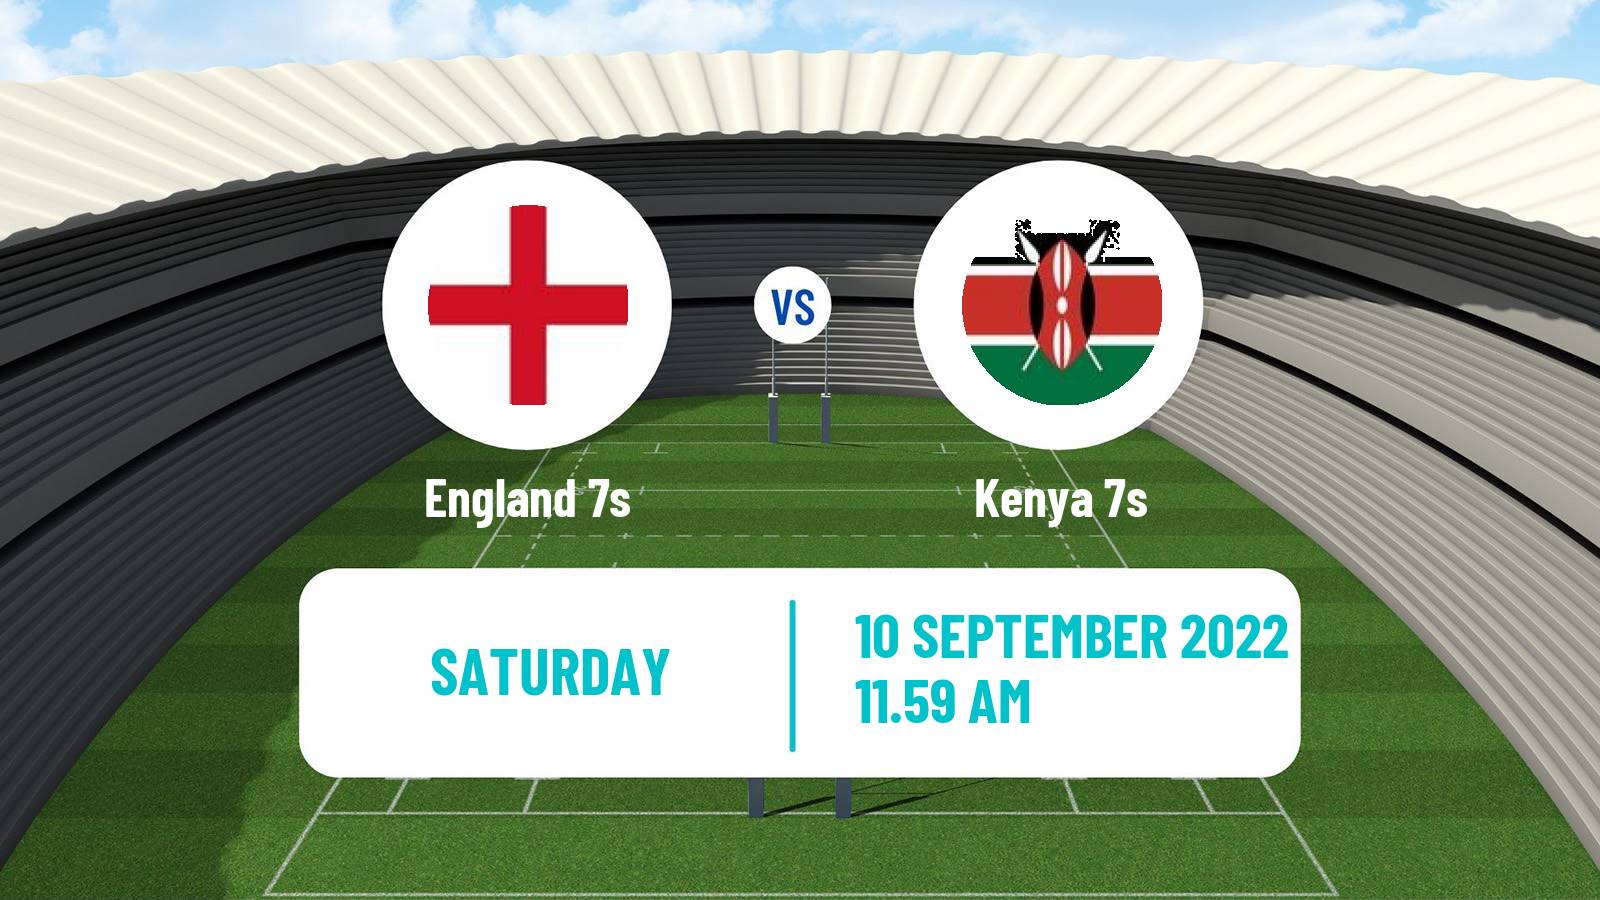 Rugby union Sevens World Cup England 7s - Kenya 7s